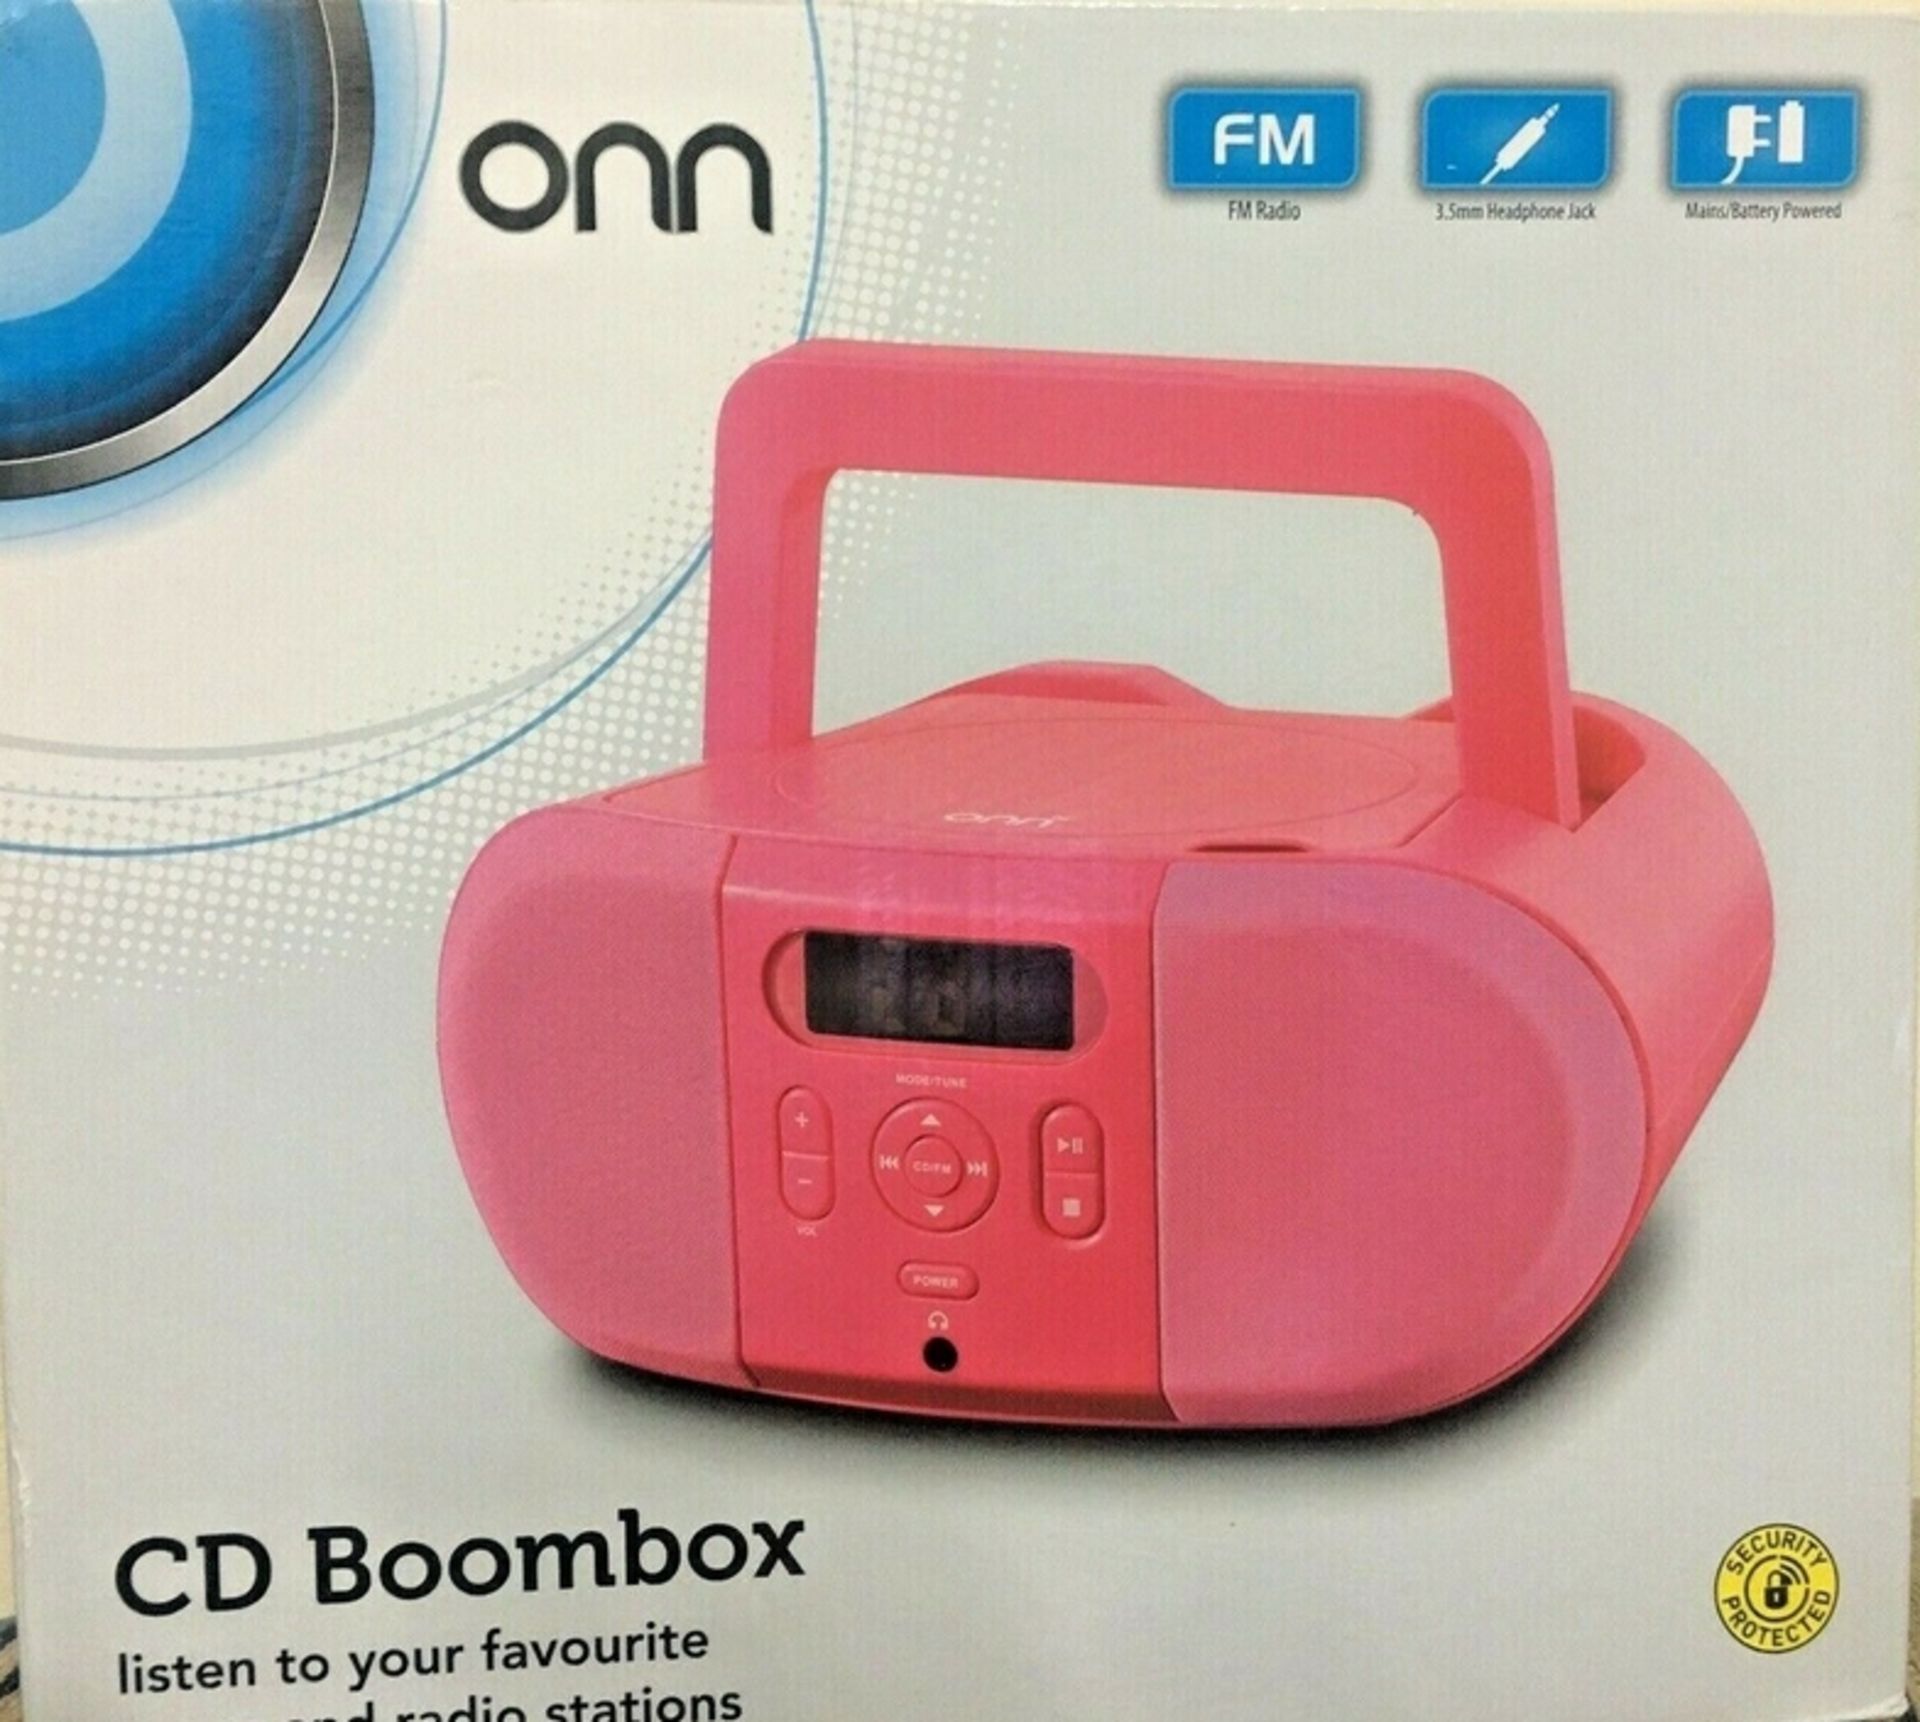 4 x onn portable cd player boombox with digital fm radio - Image 3 of 5